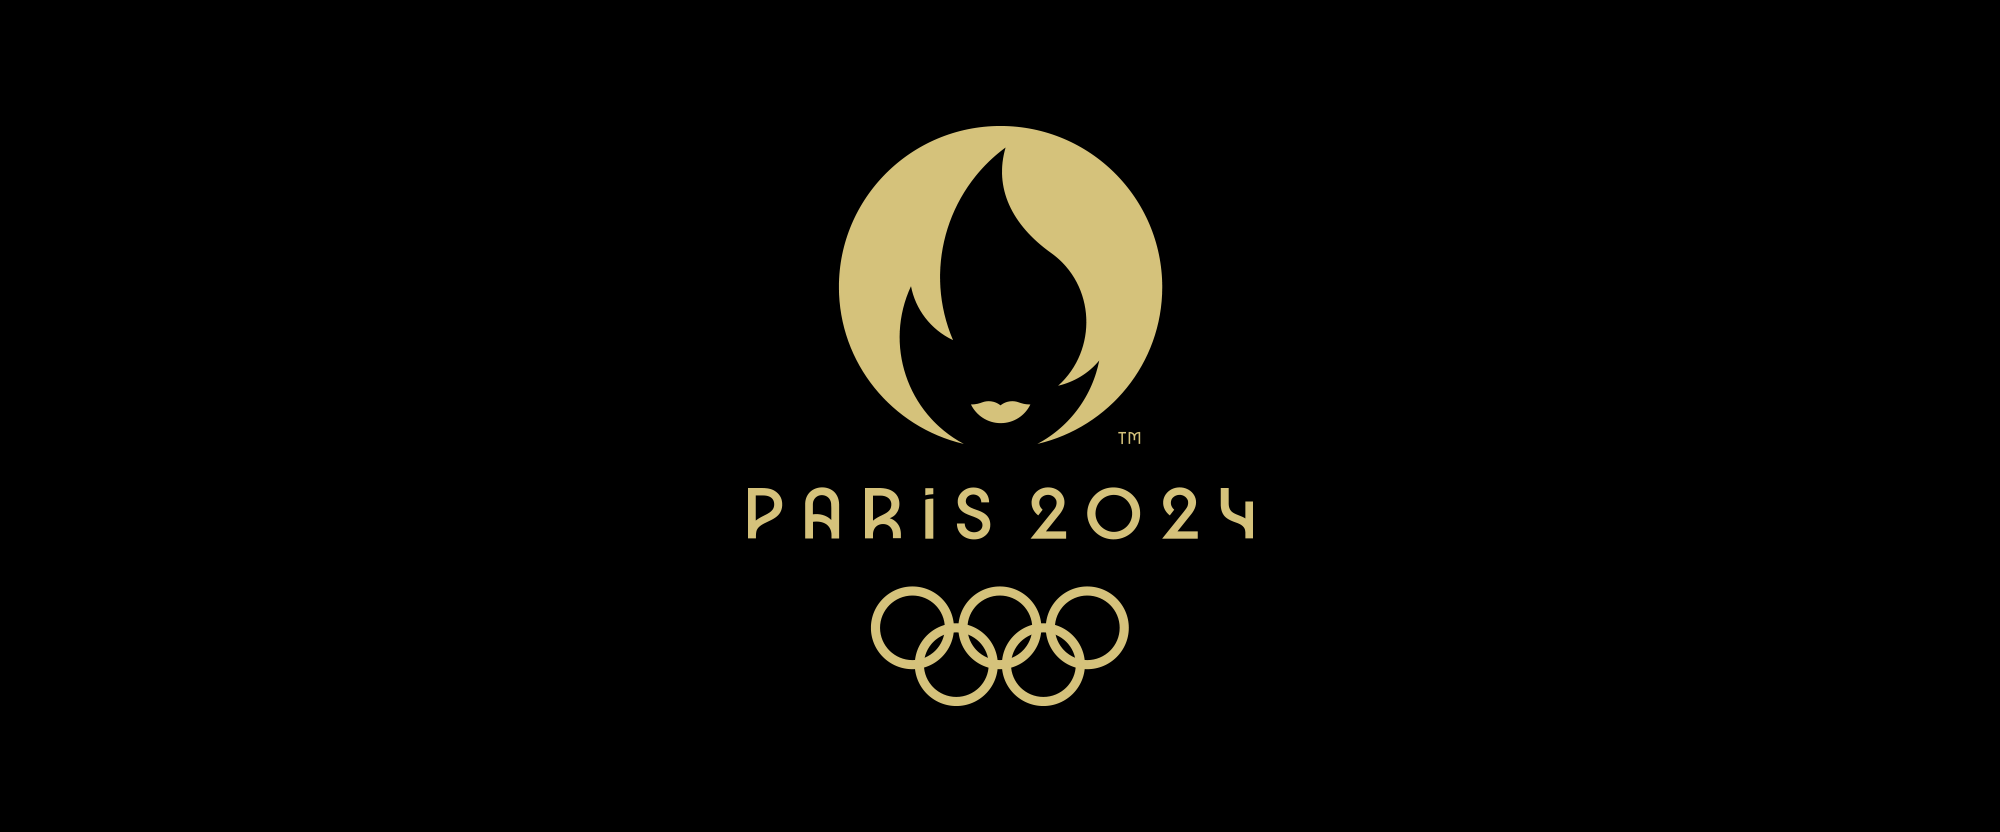 Noted New Emblem for 2024 Summer Olympics